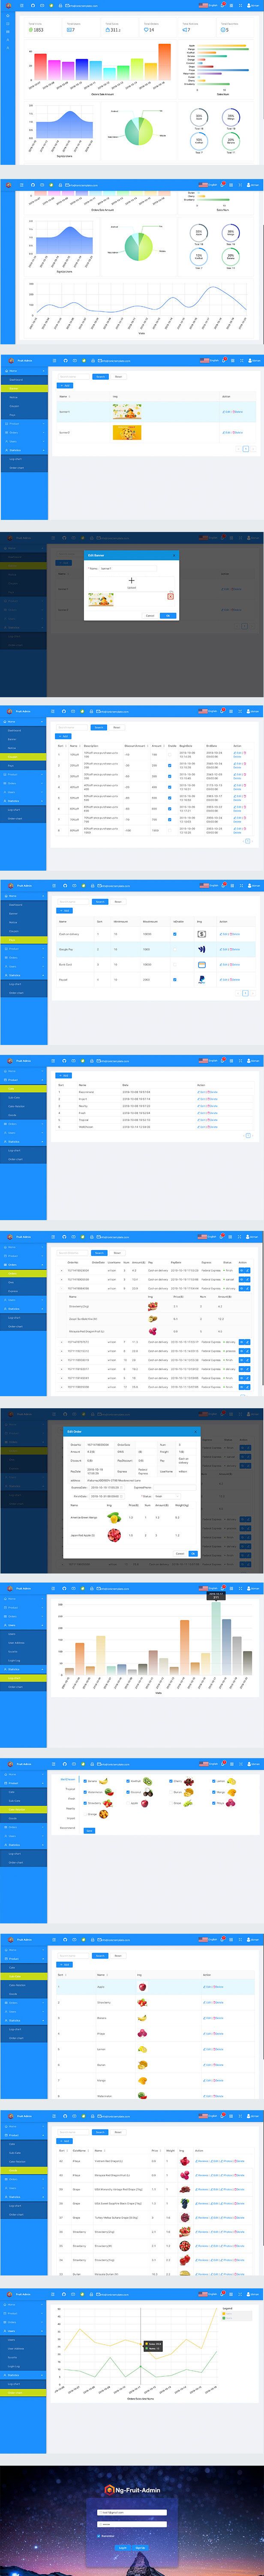 Ionic5 Fruits Commerce Shop App With Admin Backend